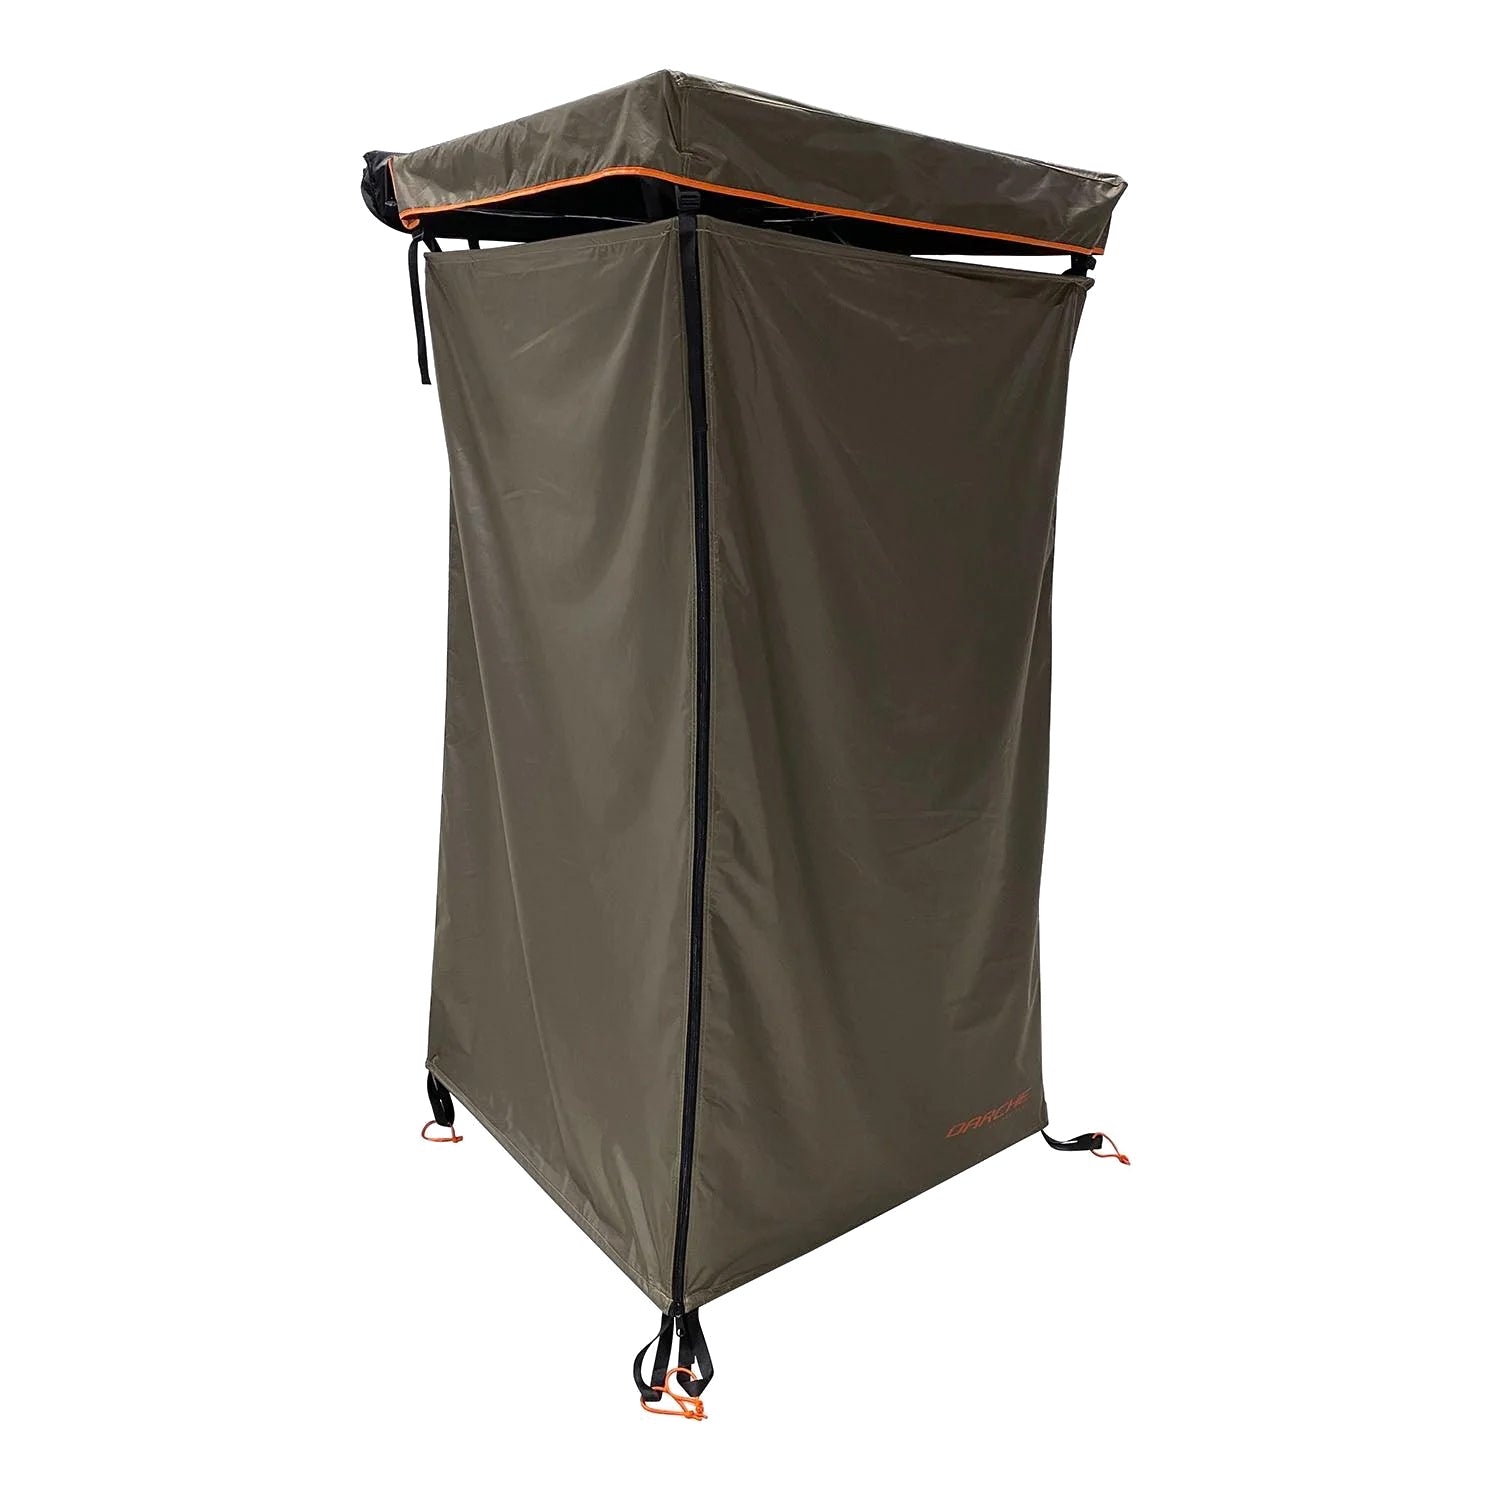 Darche Eclipse Shower Cube Awning Tent Camping - Darche - T050801084